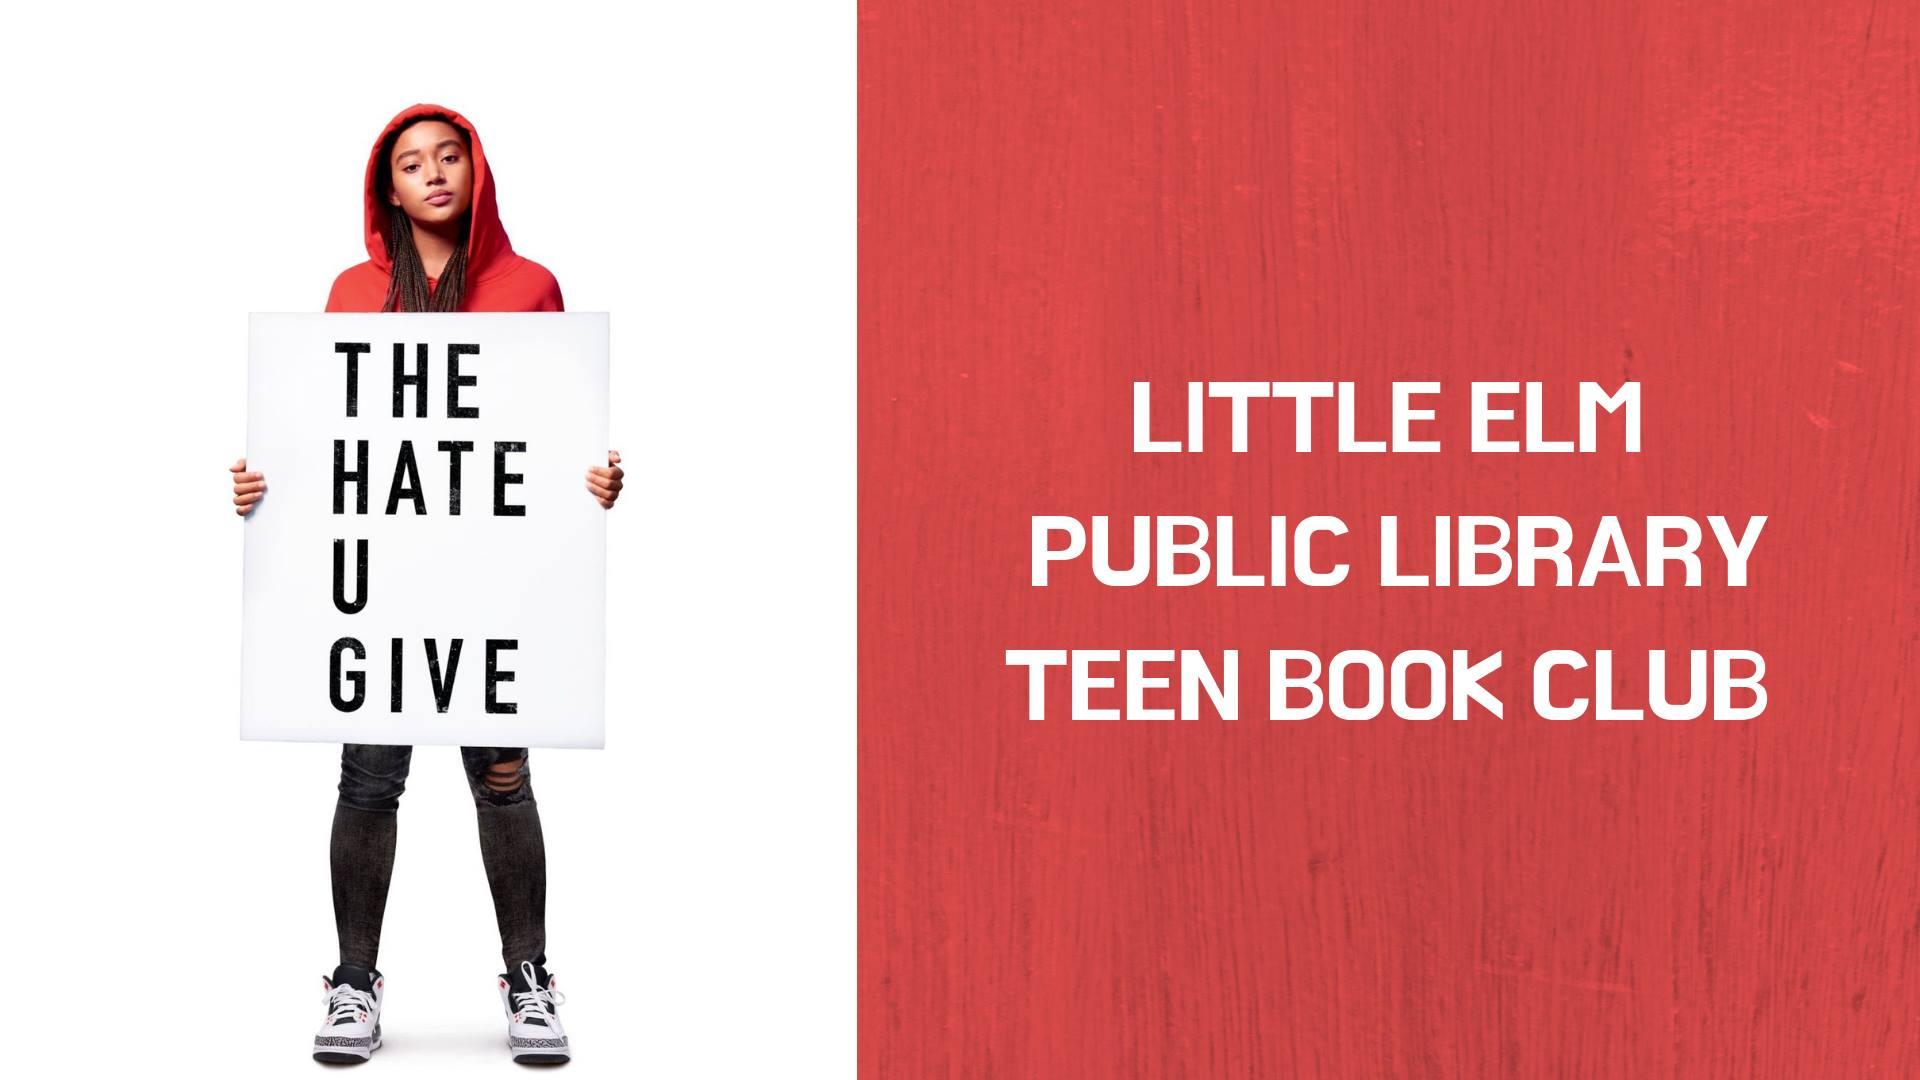 TEEN Book Club: The Hate U Give Little Elm Public Library, Dallas